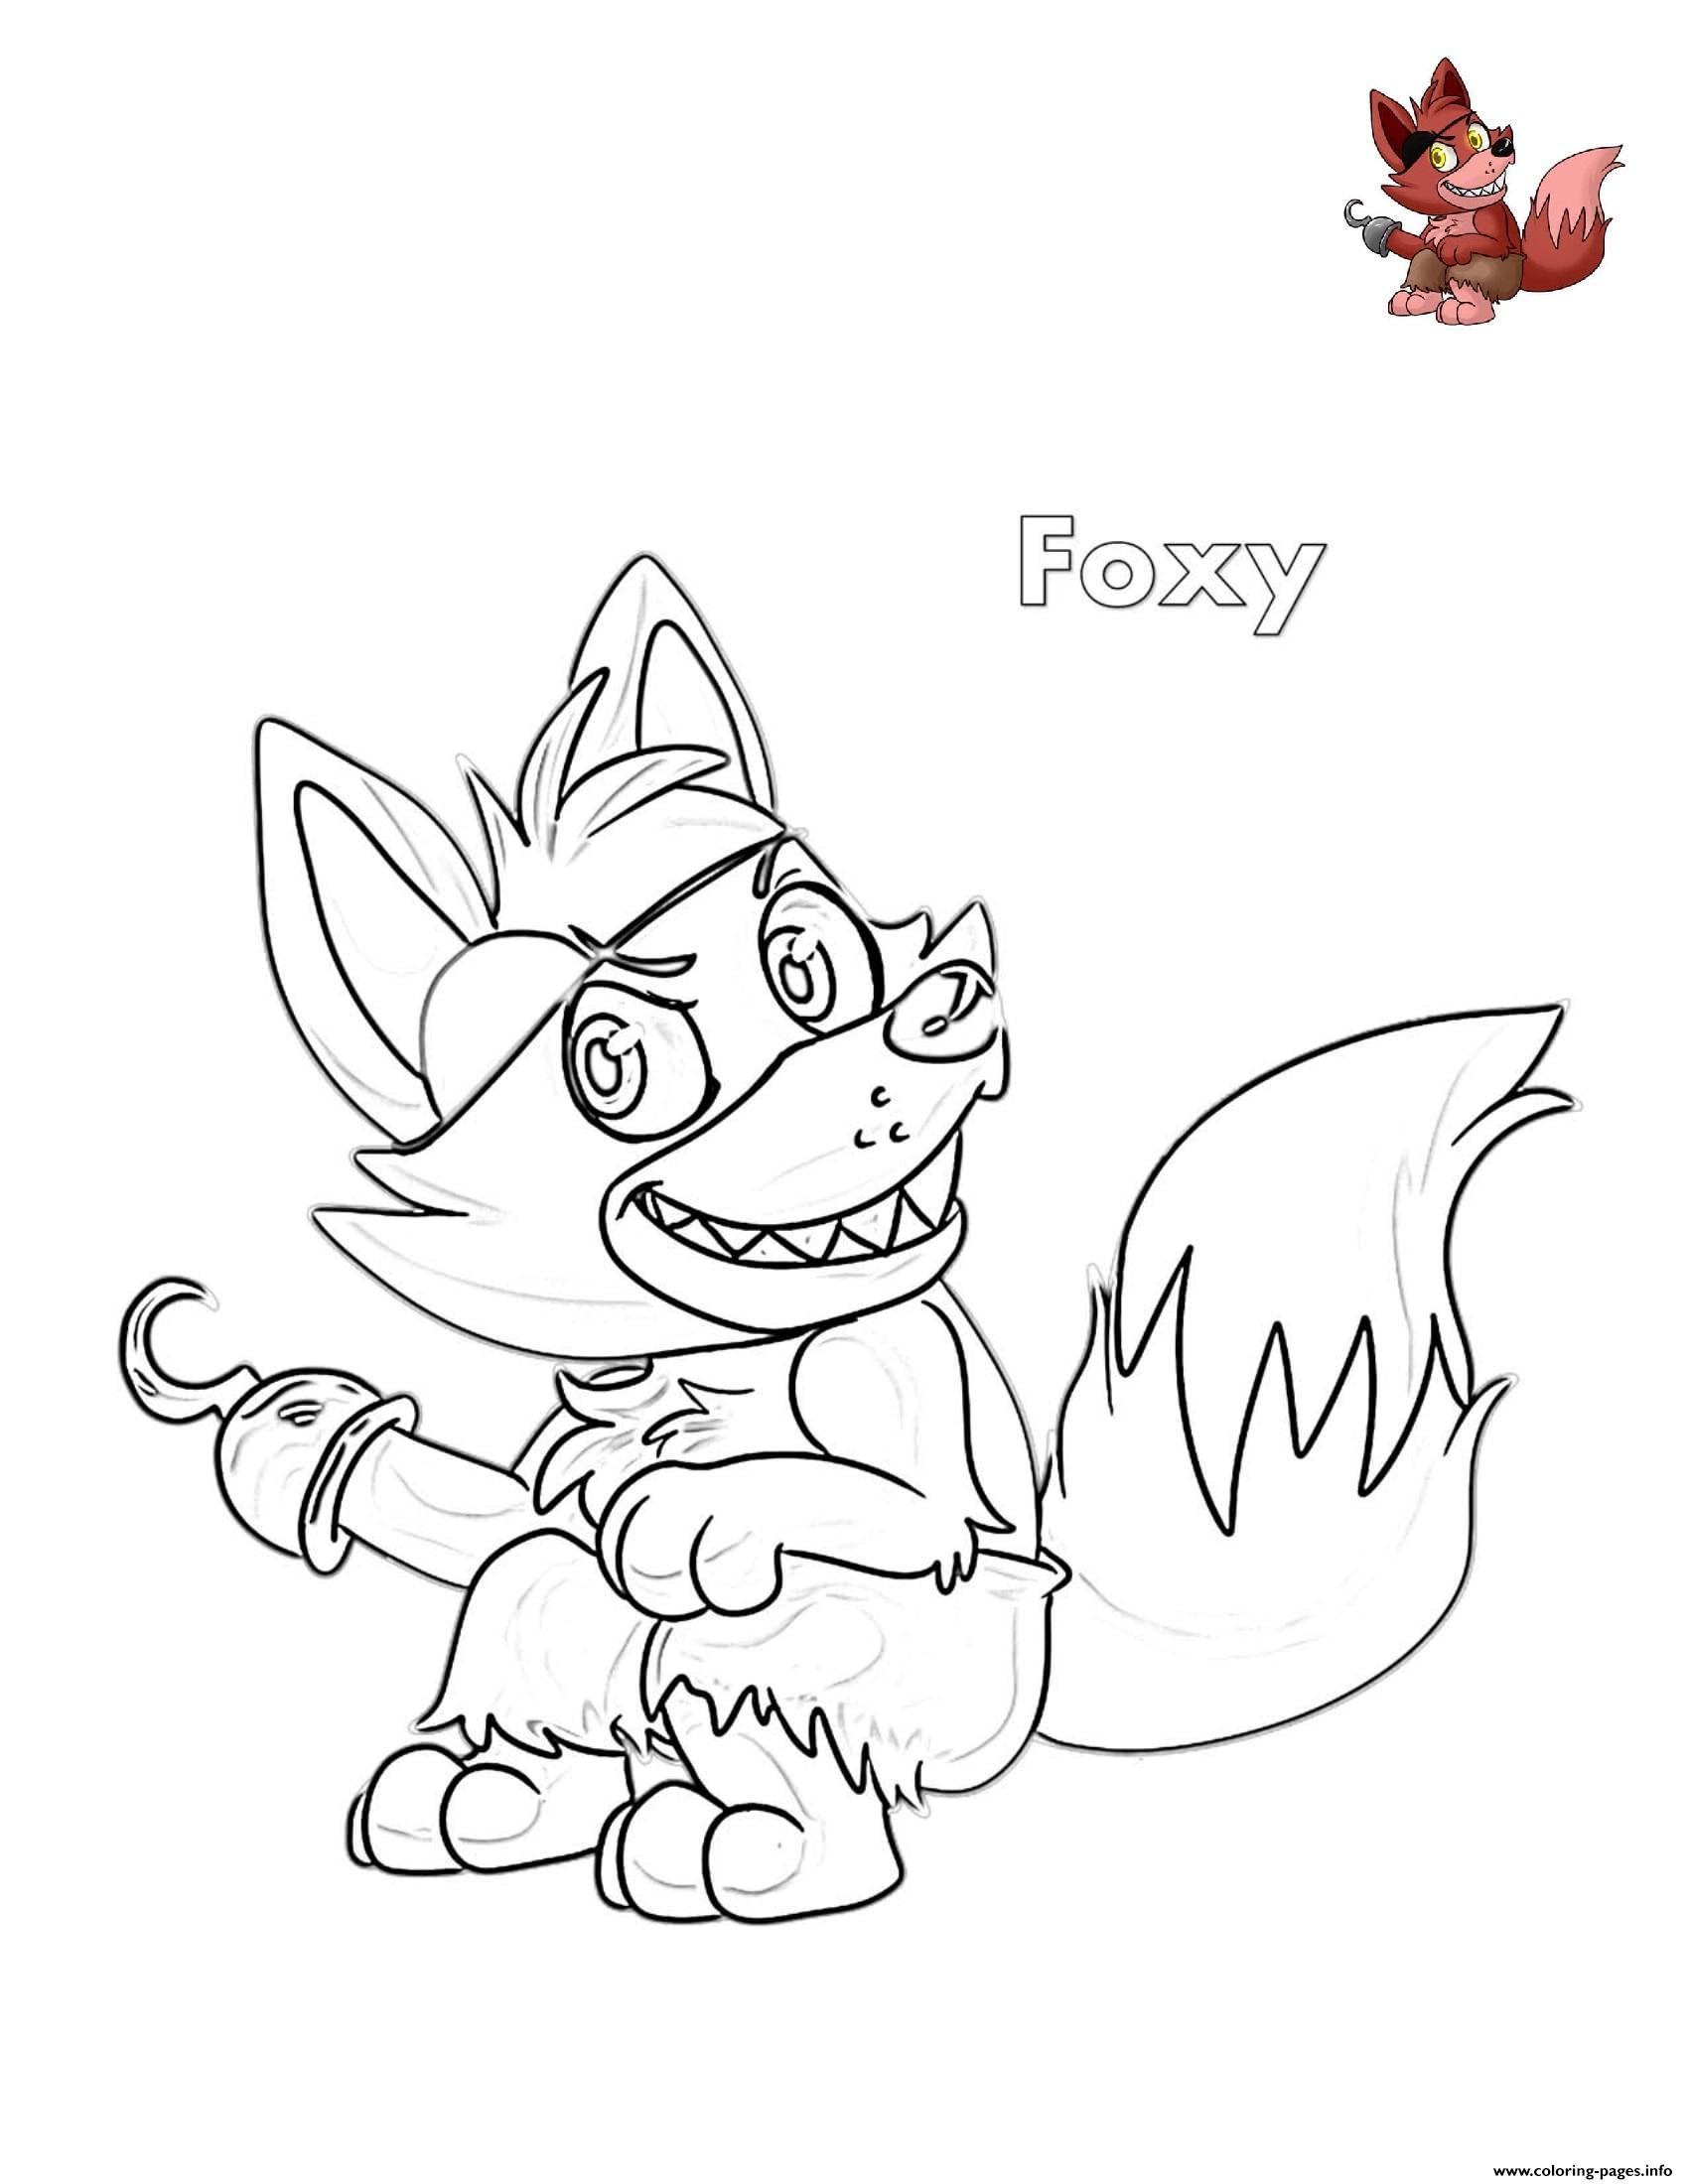 Cute Foxy FNAF Coloring Pages Printable